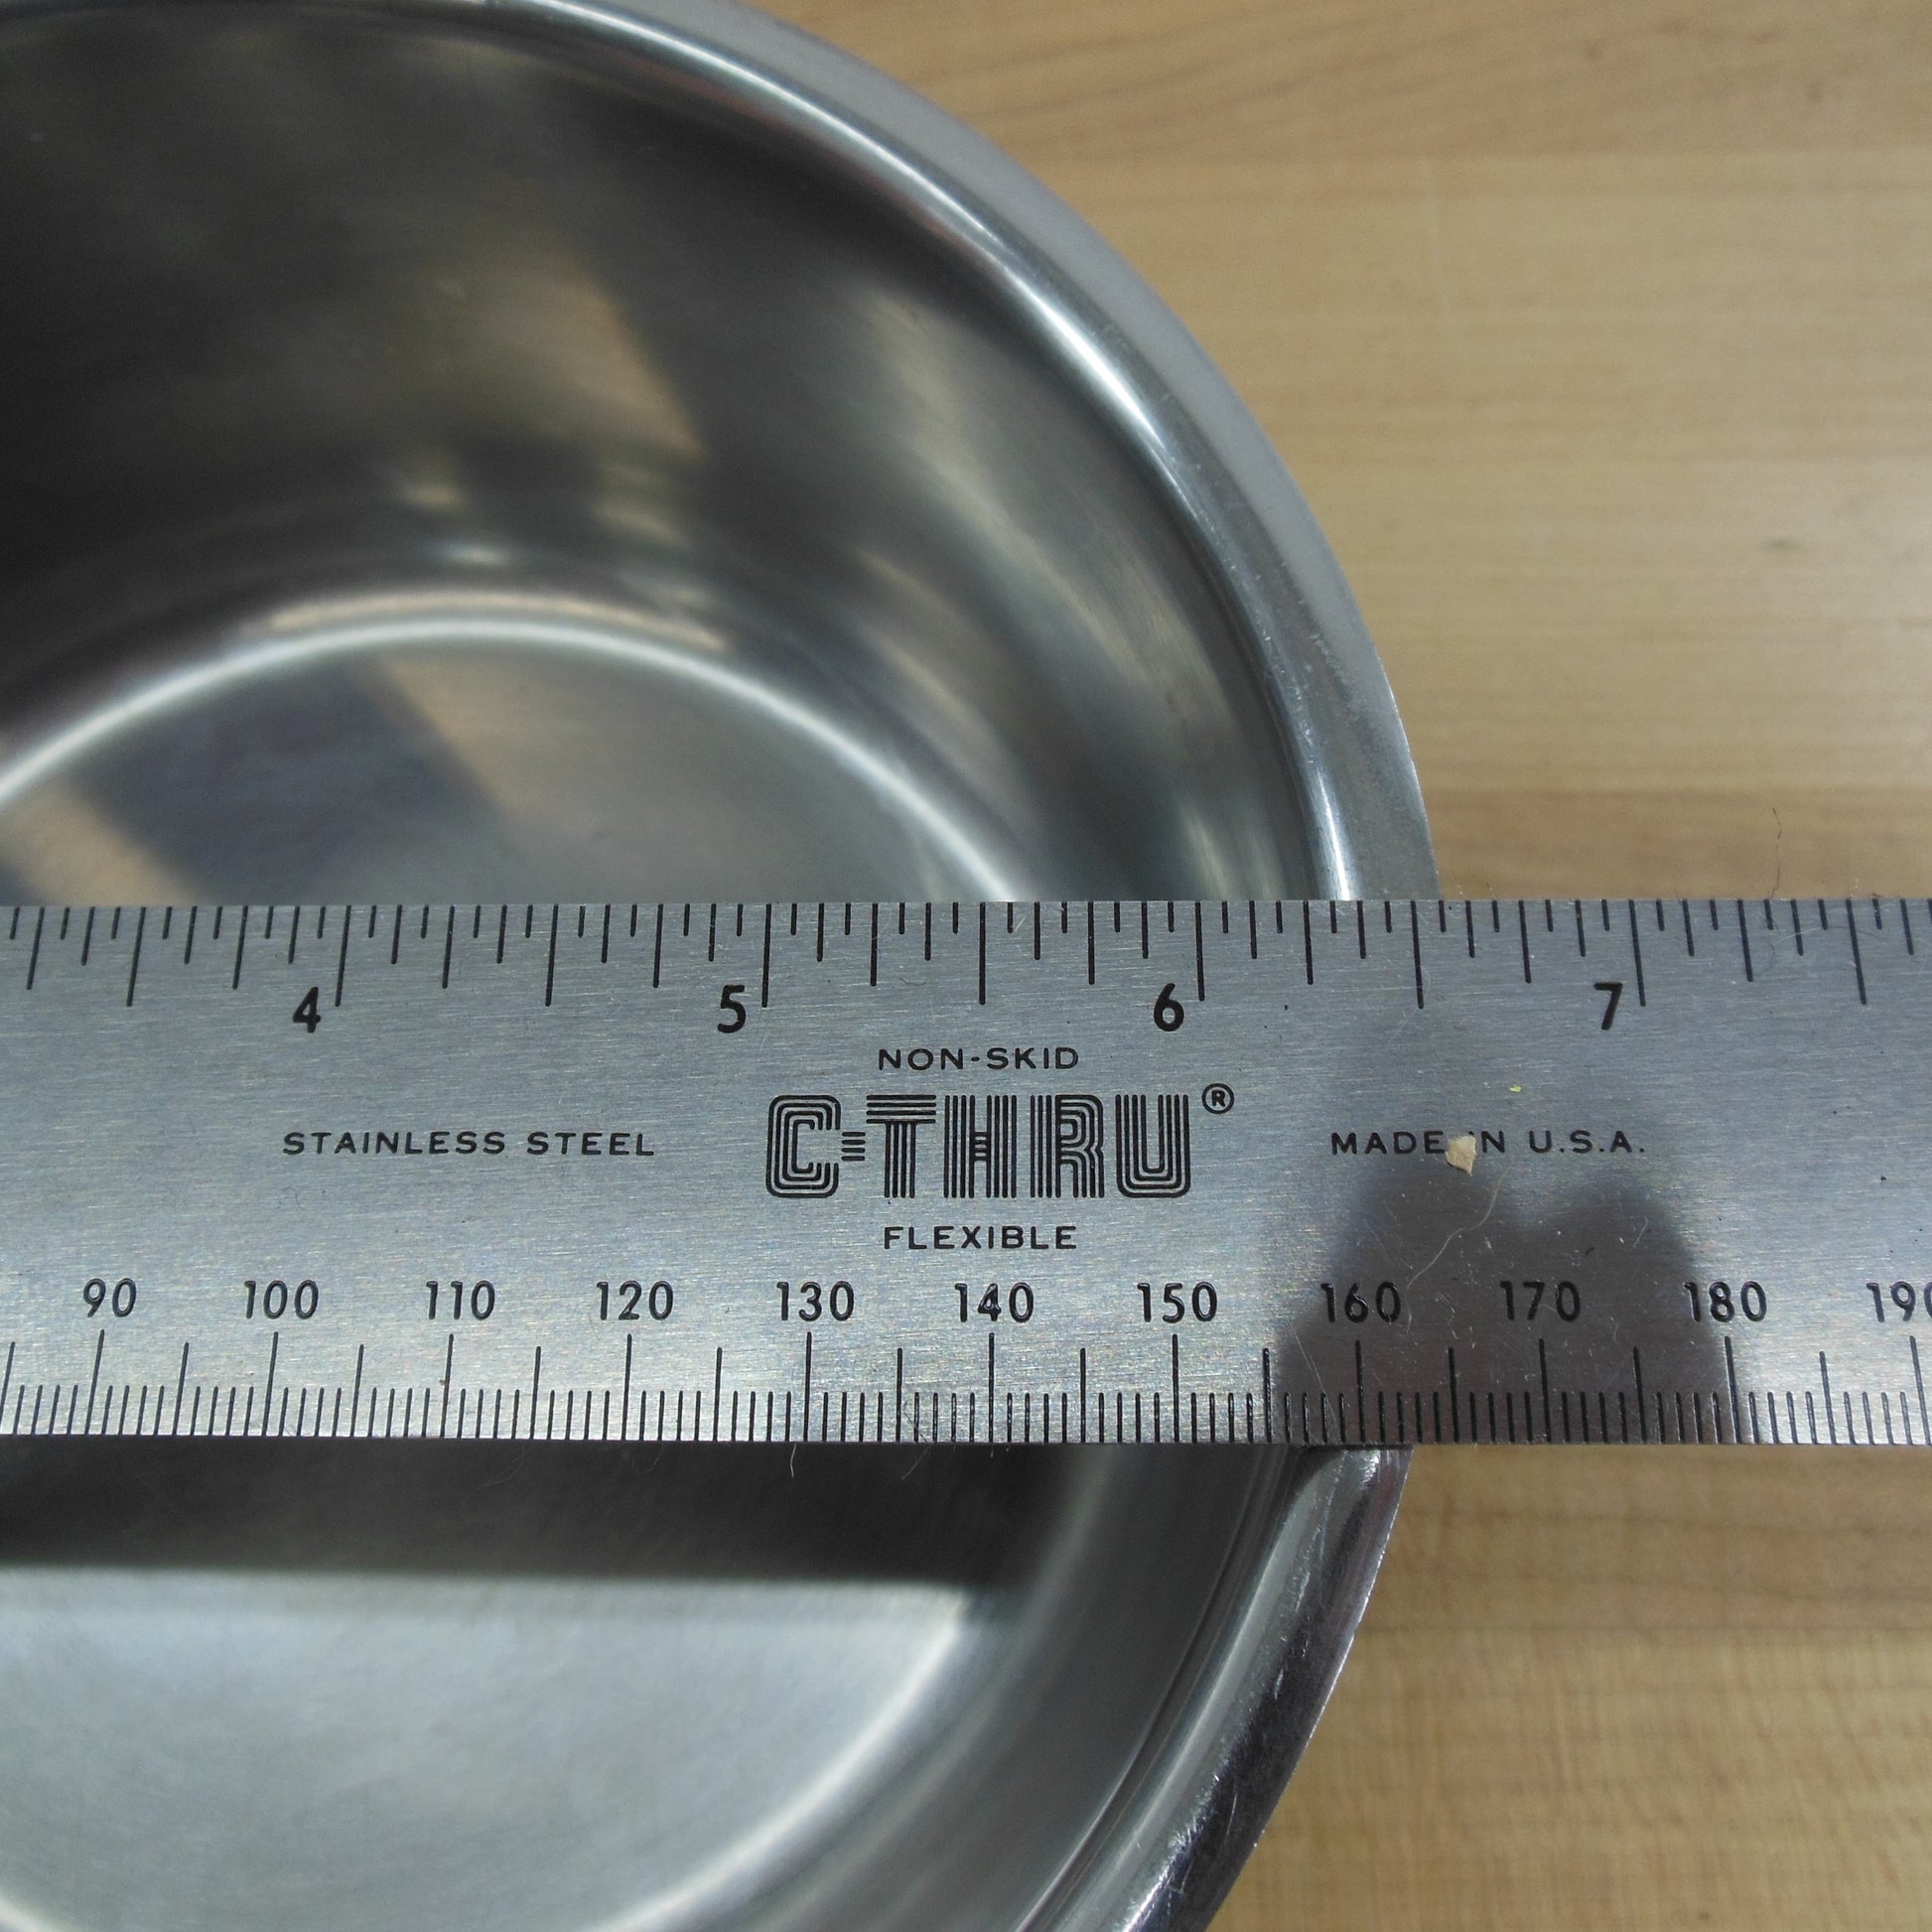 Cuisinart Style Stainless Double Boiler Insert for Sauce Pan - Teak Wood Handle Used